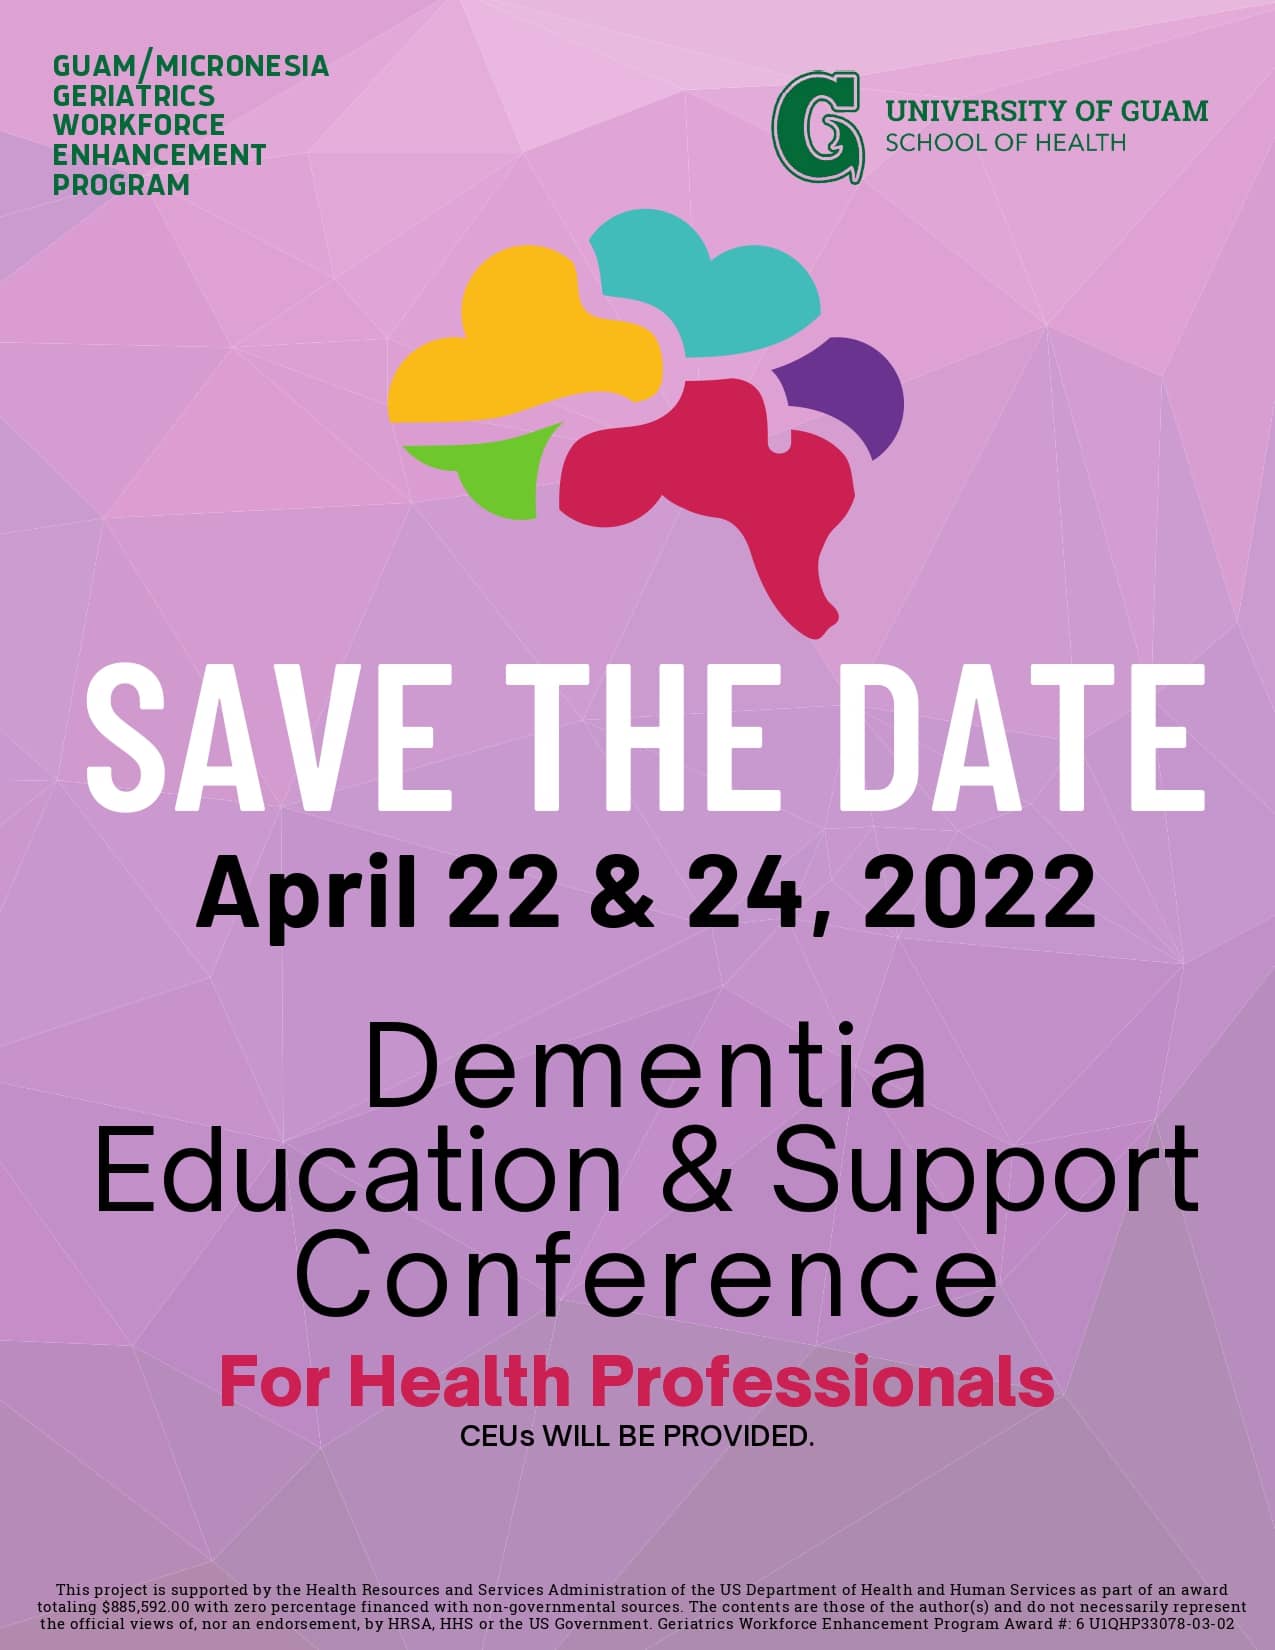 GWEP Dementia Education & Support Conference for Health Professionals